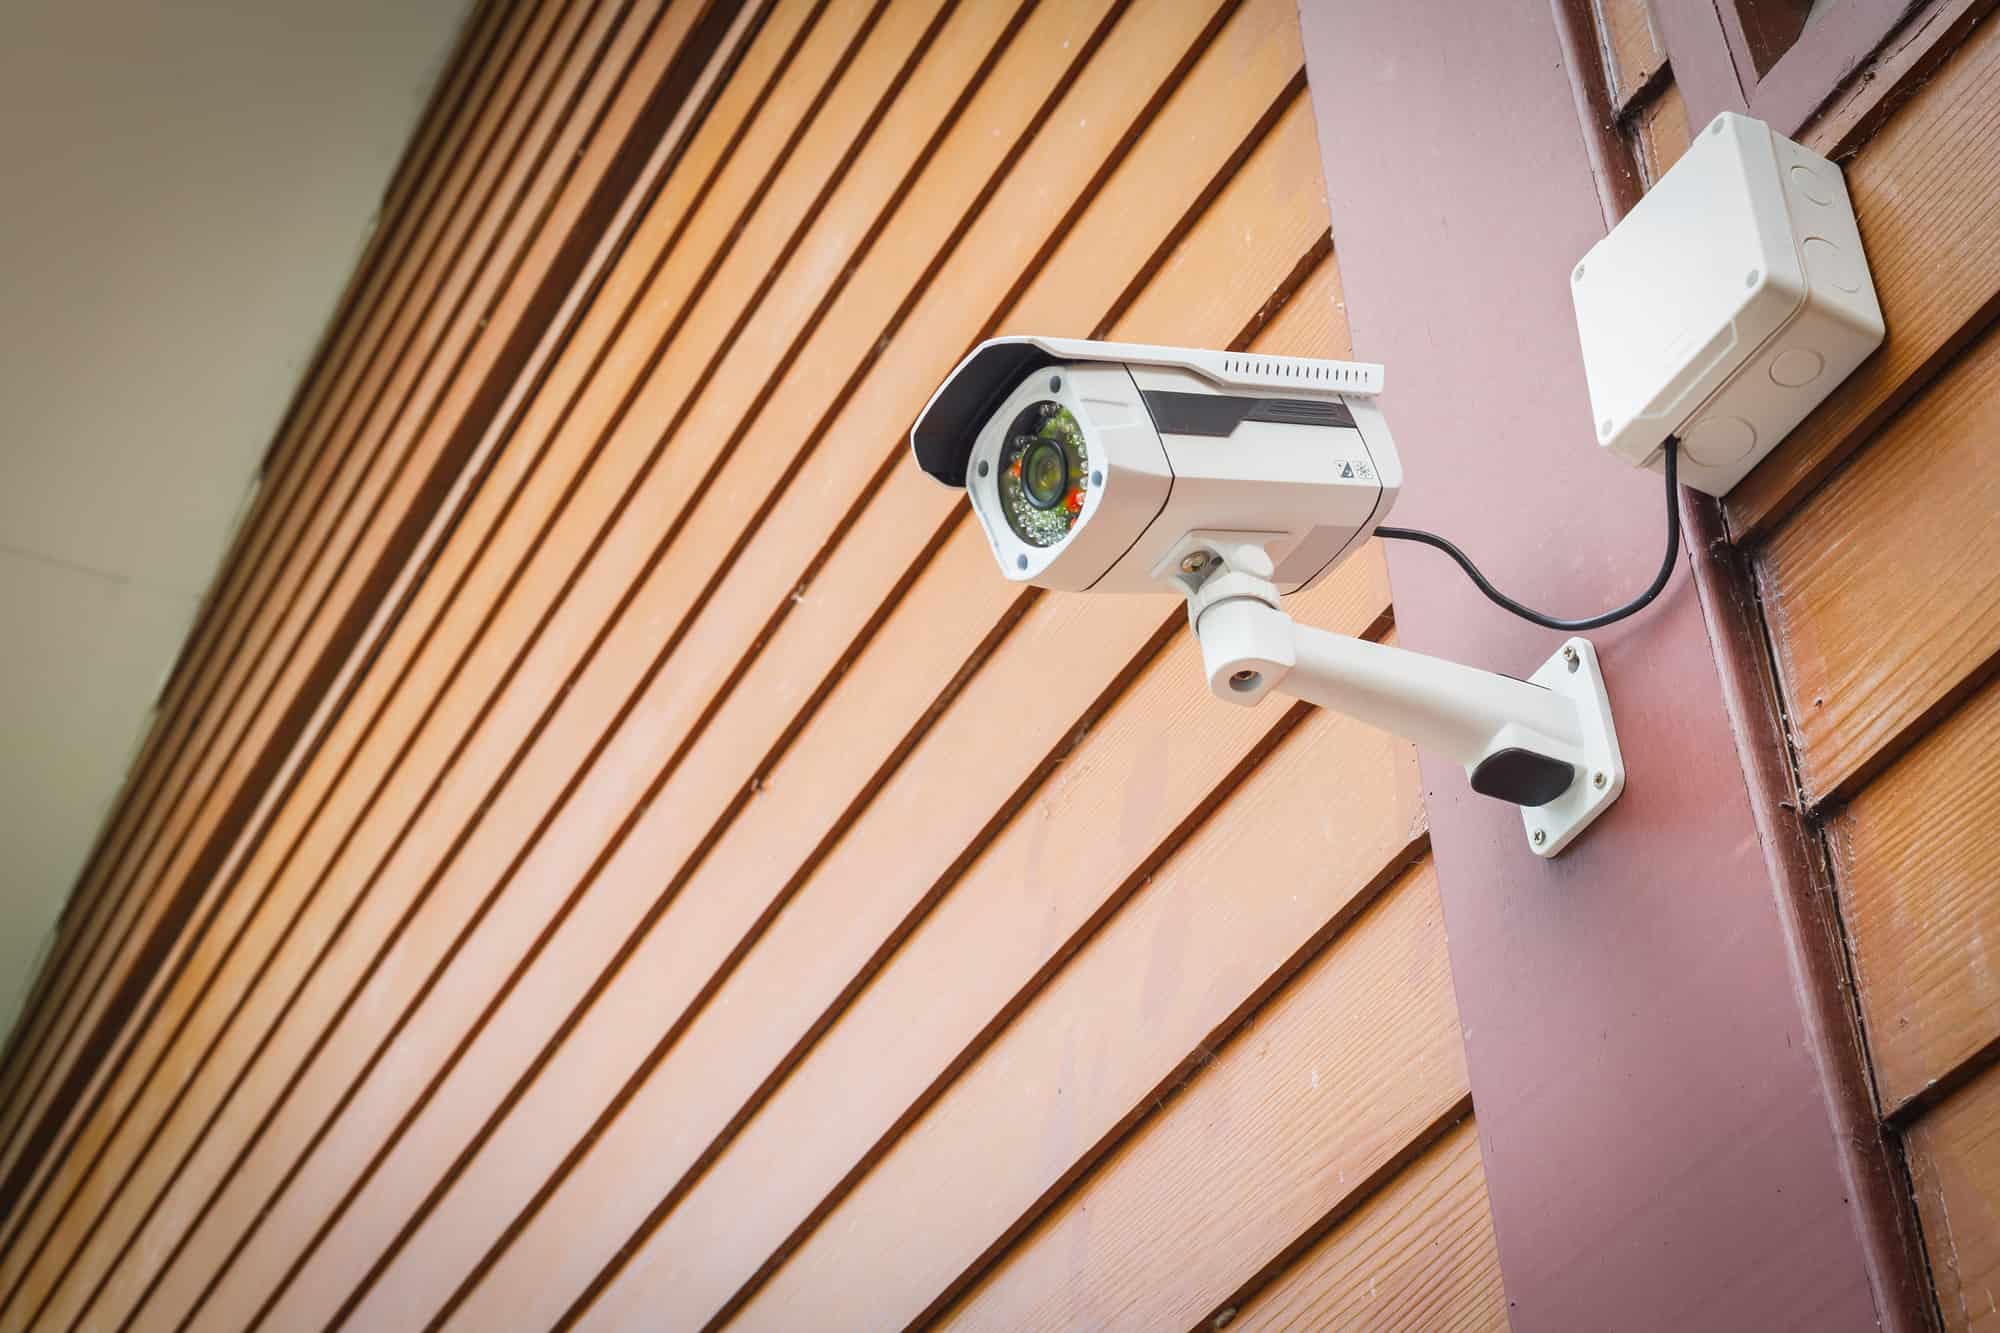 What To Look For In An Outdoor Security Camera System